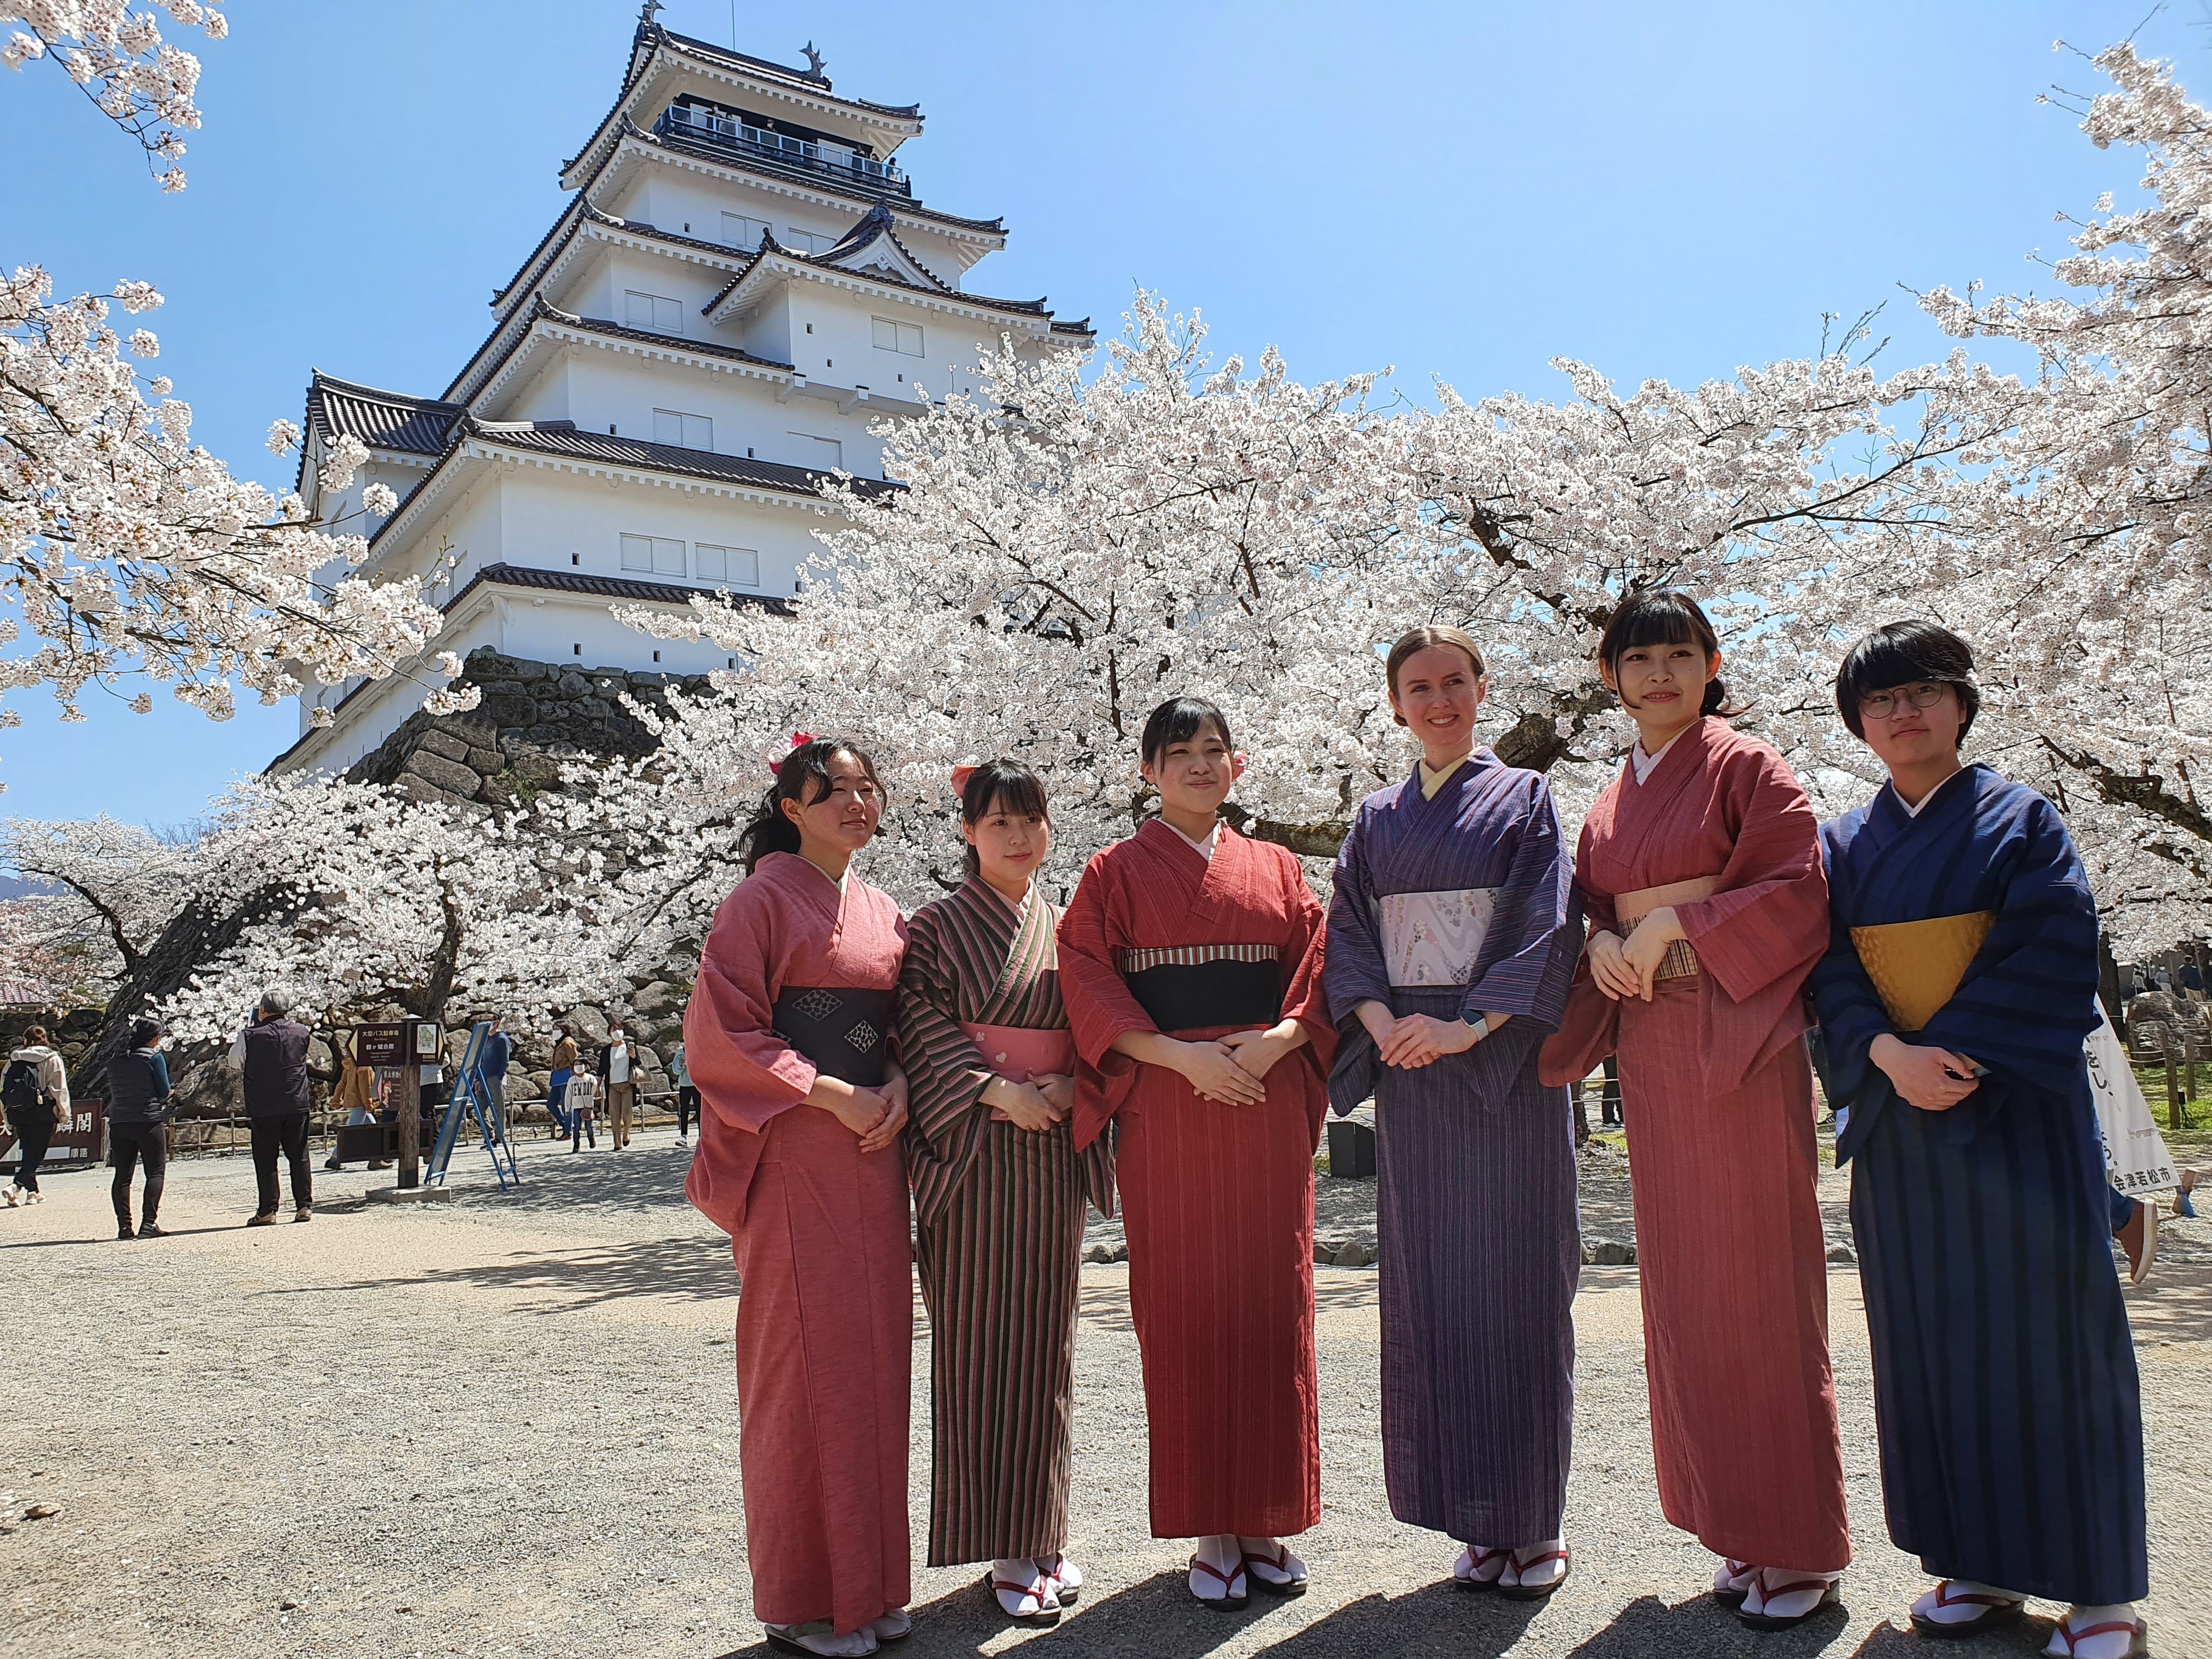 International Students and Junior College Students of the University of Aizu Participated in a Town Walk wearing Aizu Cotton Kimono